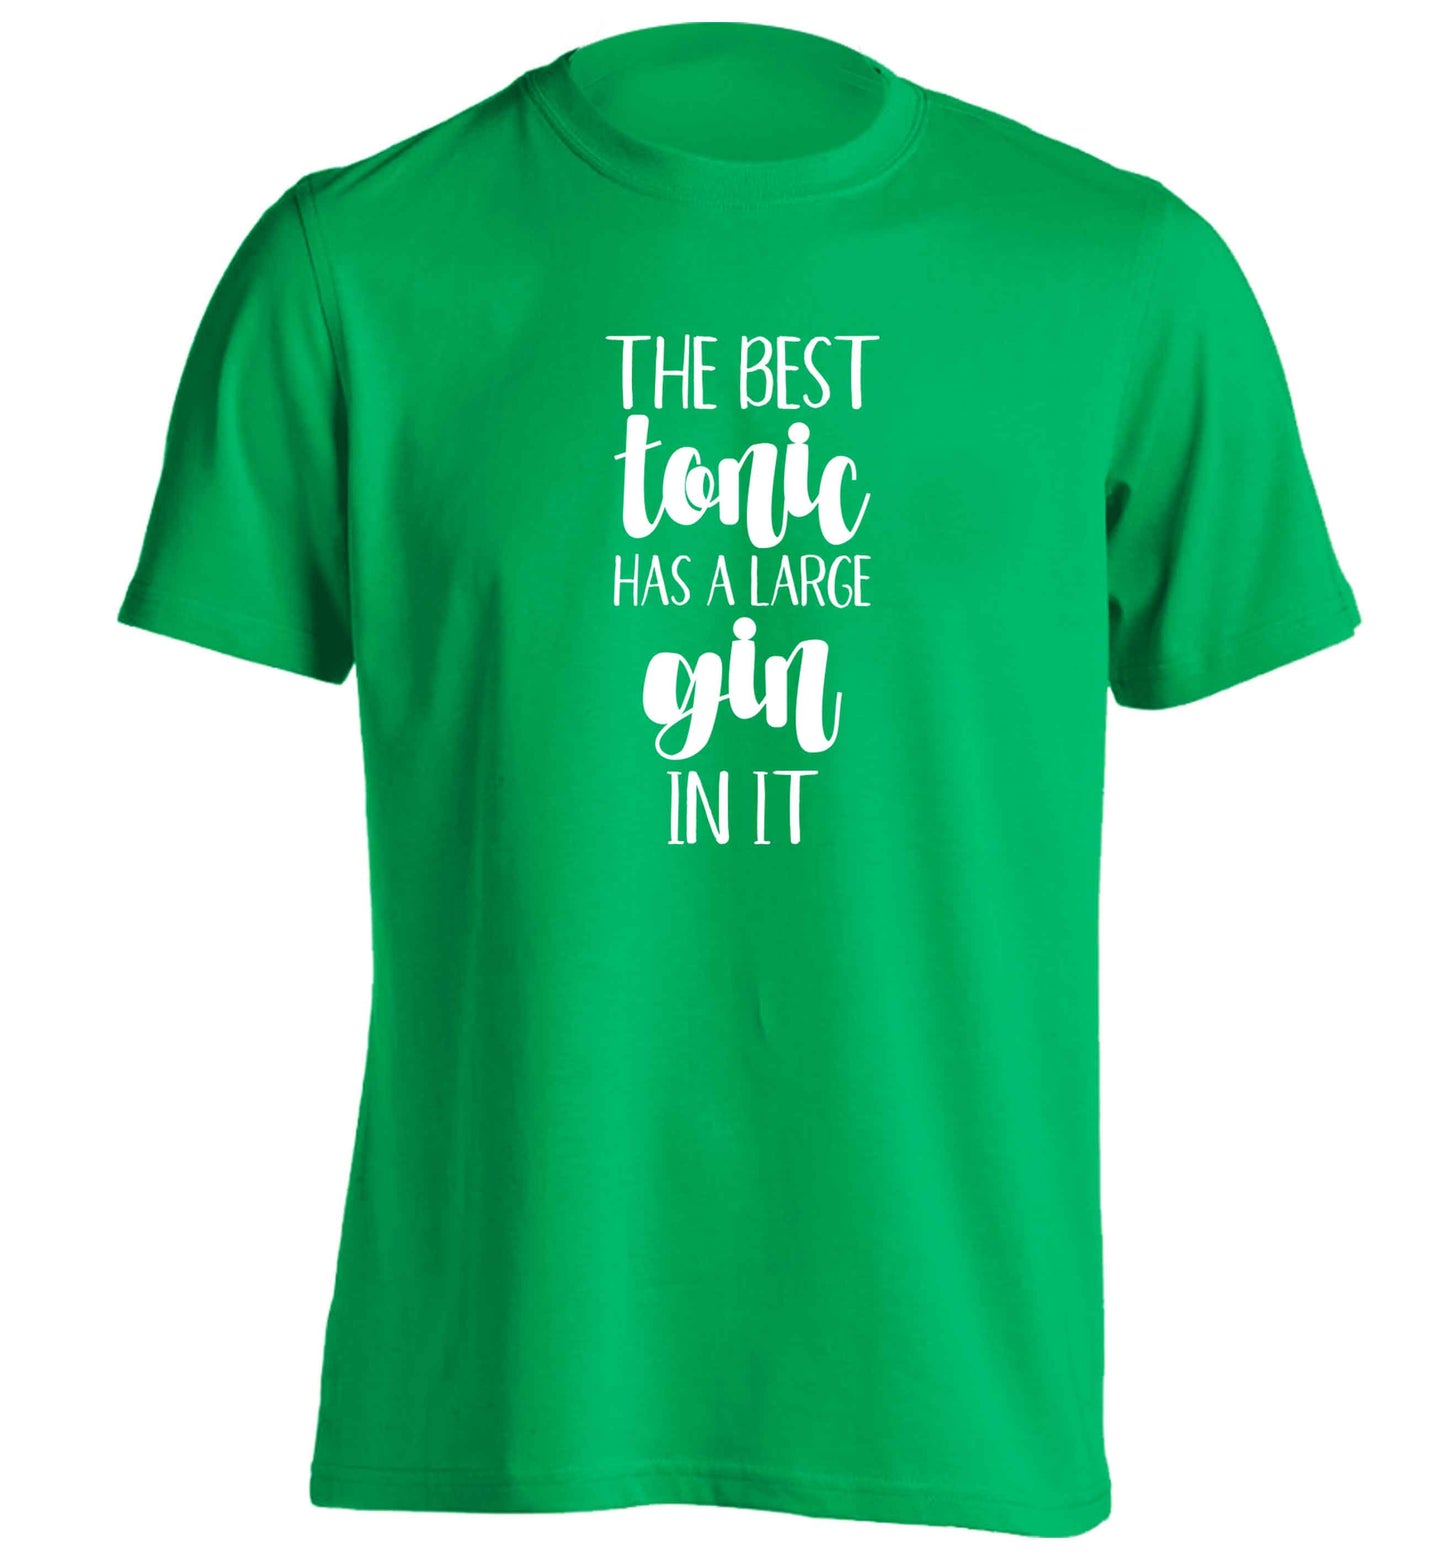 The best tonic has a large gin in it adults unisex green Tshirt 2XL